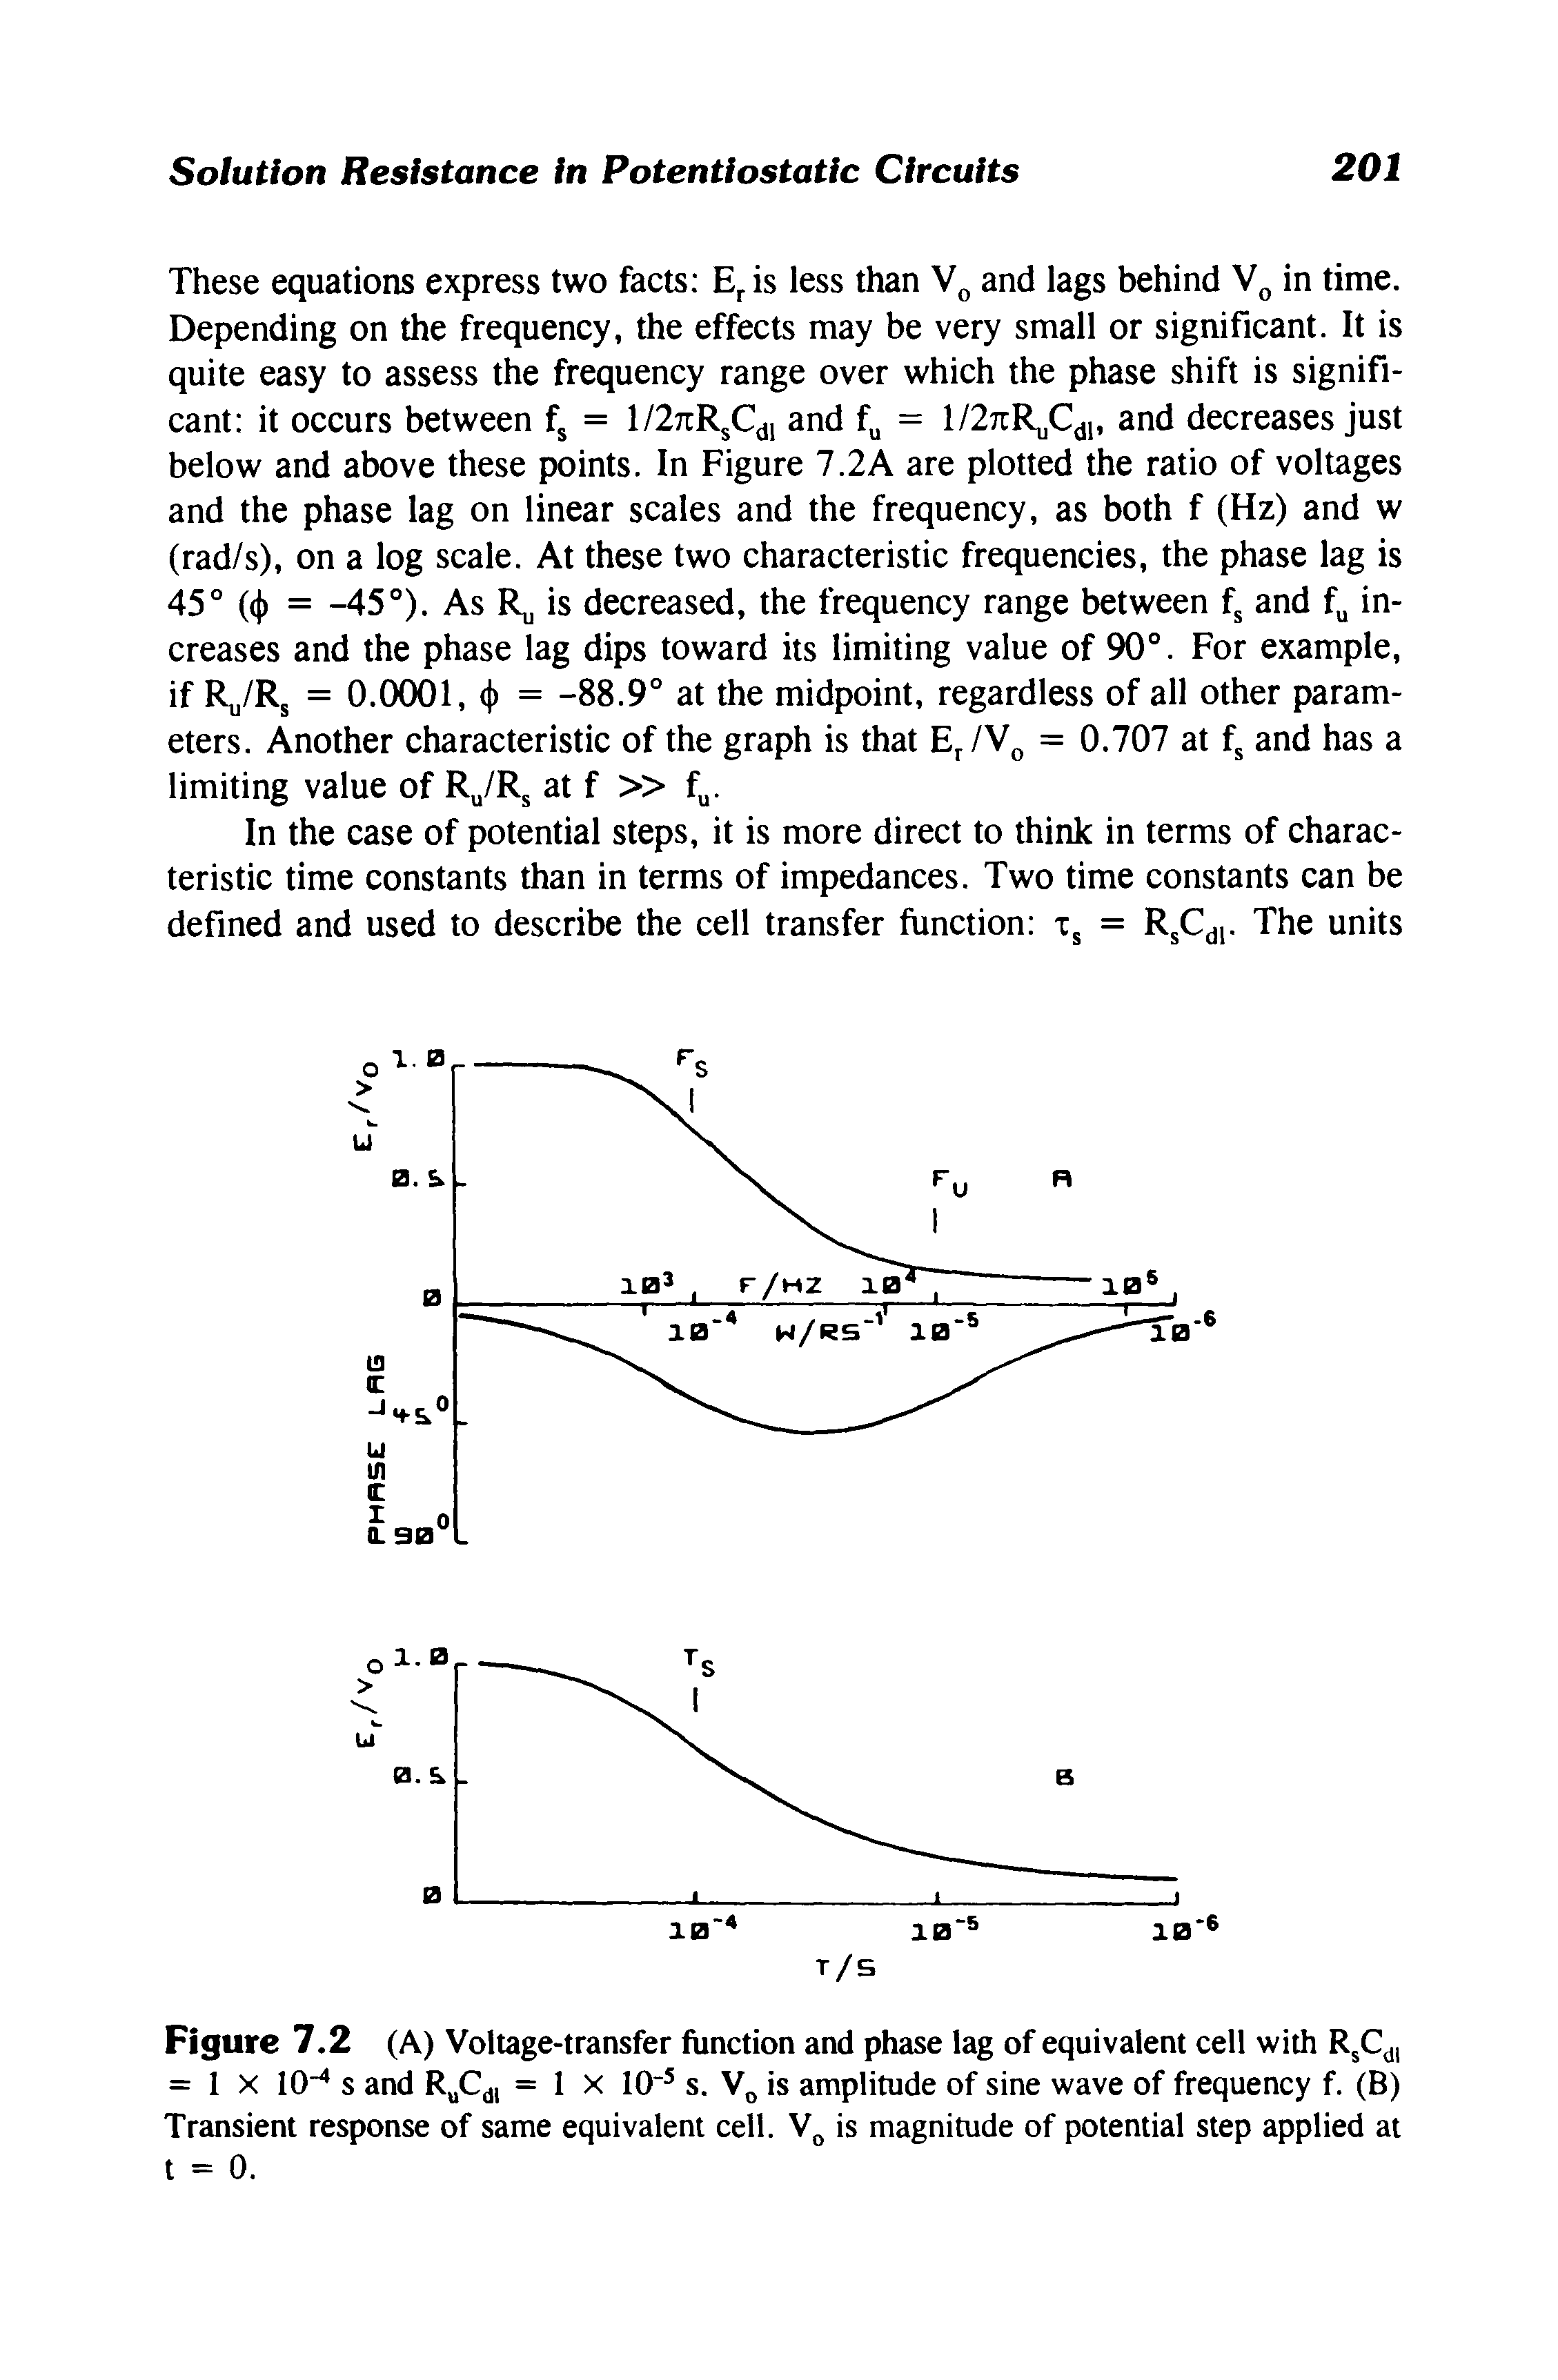 Figure 7.2 (A) Voltage-transfer function and phase lag of equivalent cell with RsCdl = 1 x 10"4 s and RuCd, = 1 x 10 5 s. VD is amplitude of sine wave of frequency f. (B) Transient response of same equivalent cell. V0 is magnitude of potential step applied at t = 0.